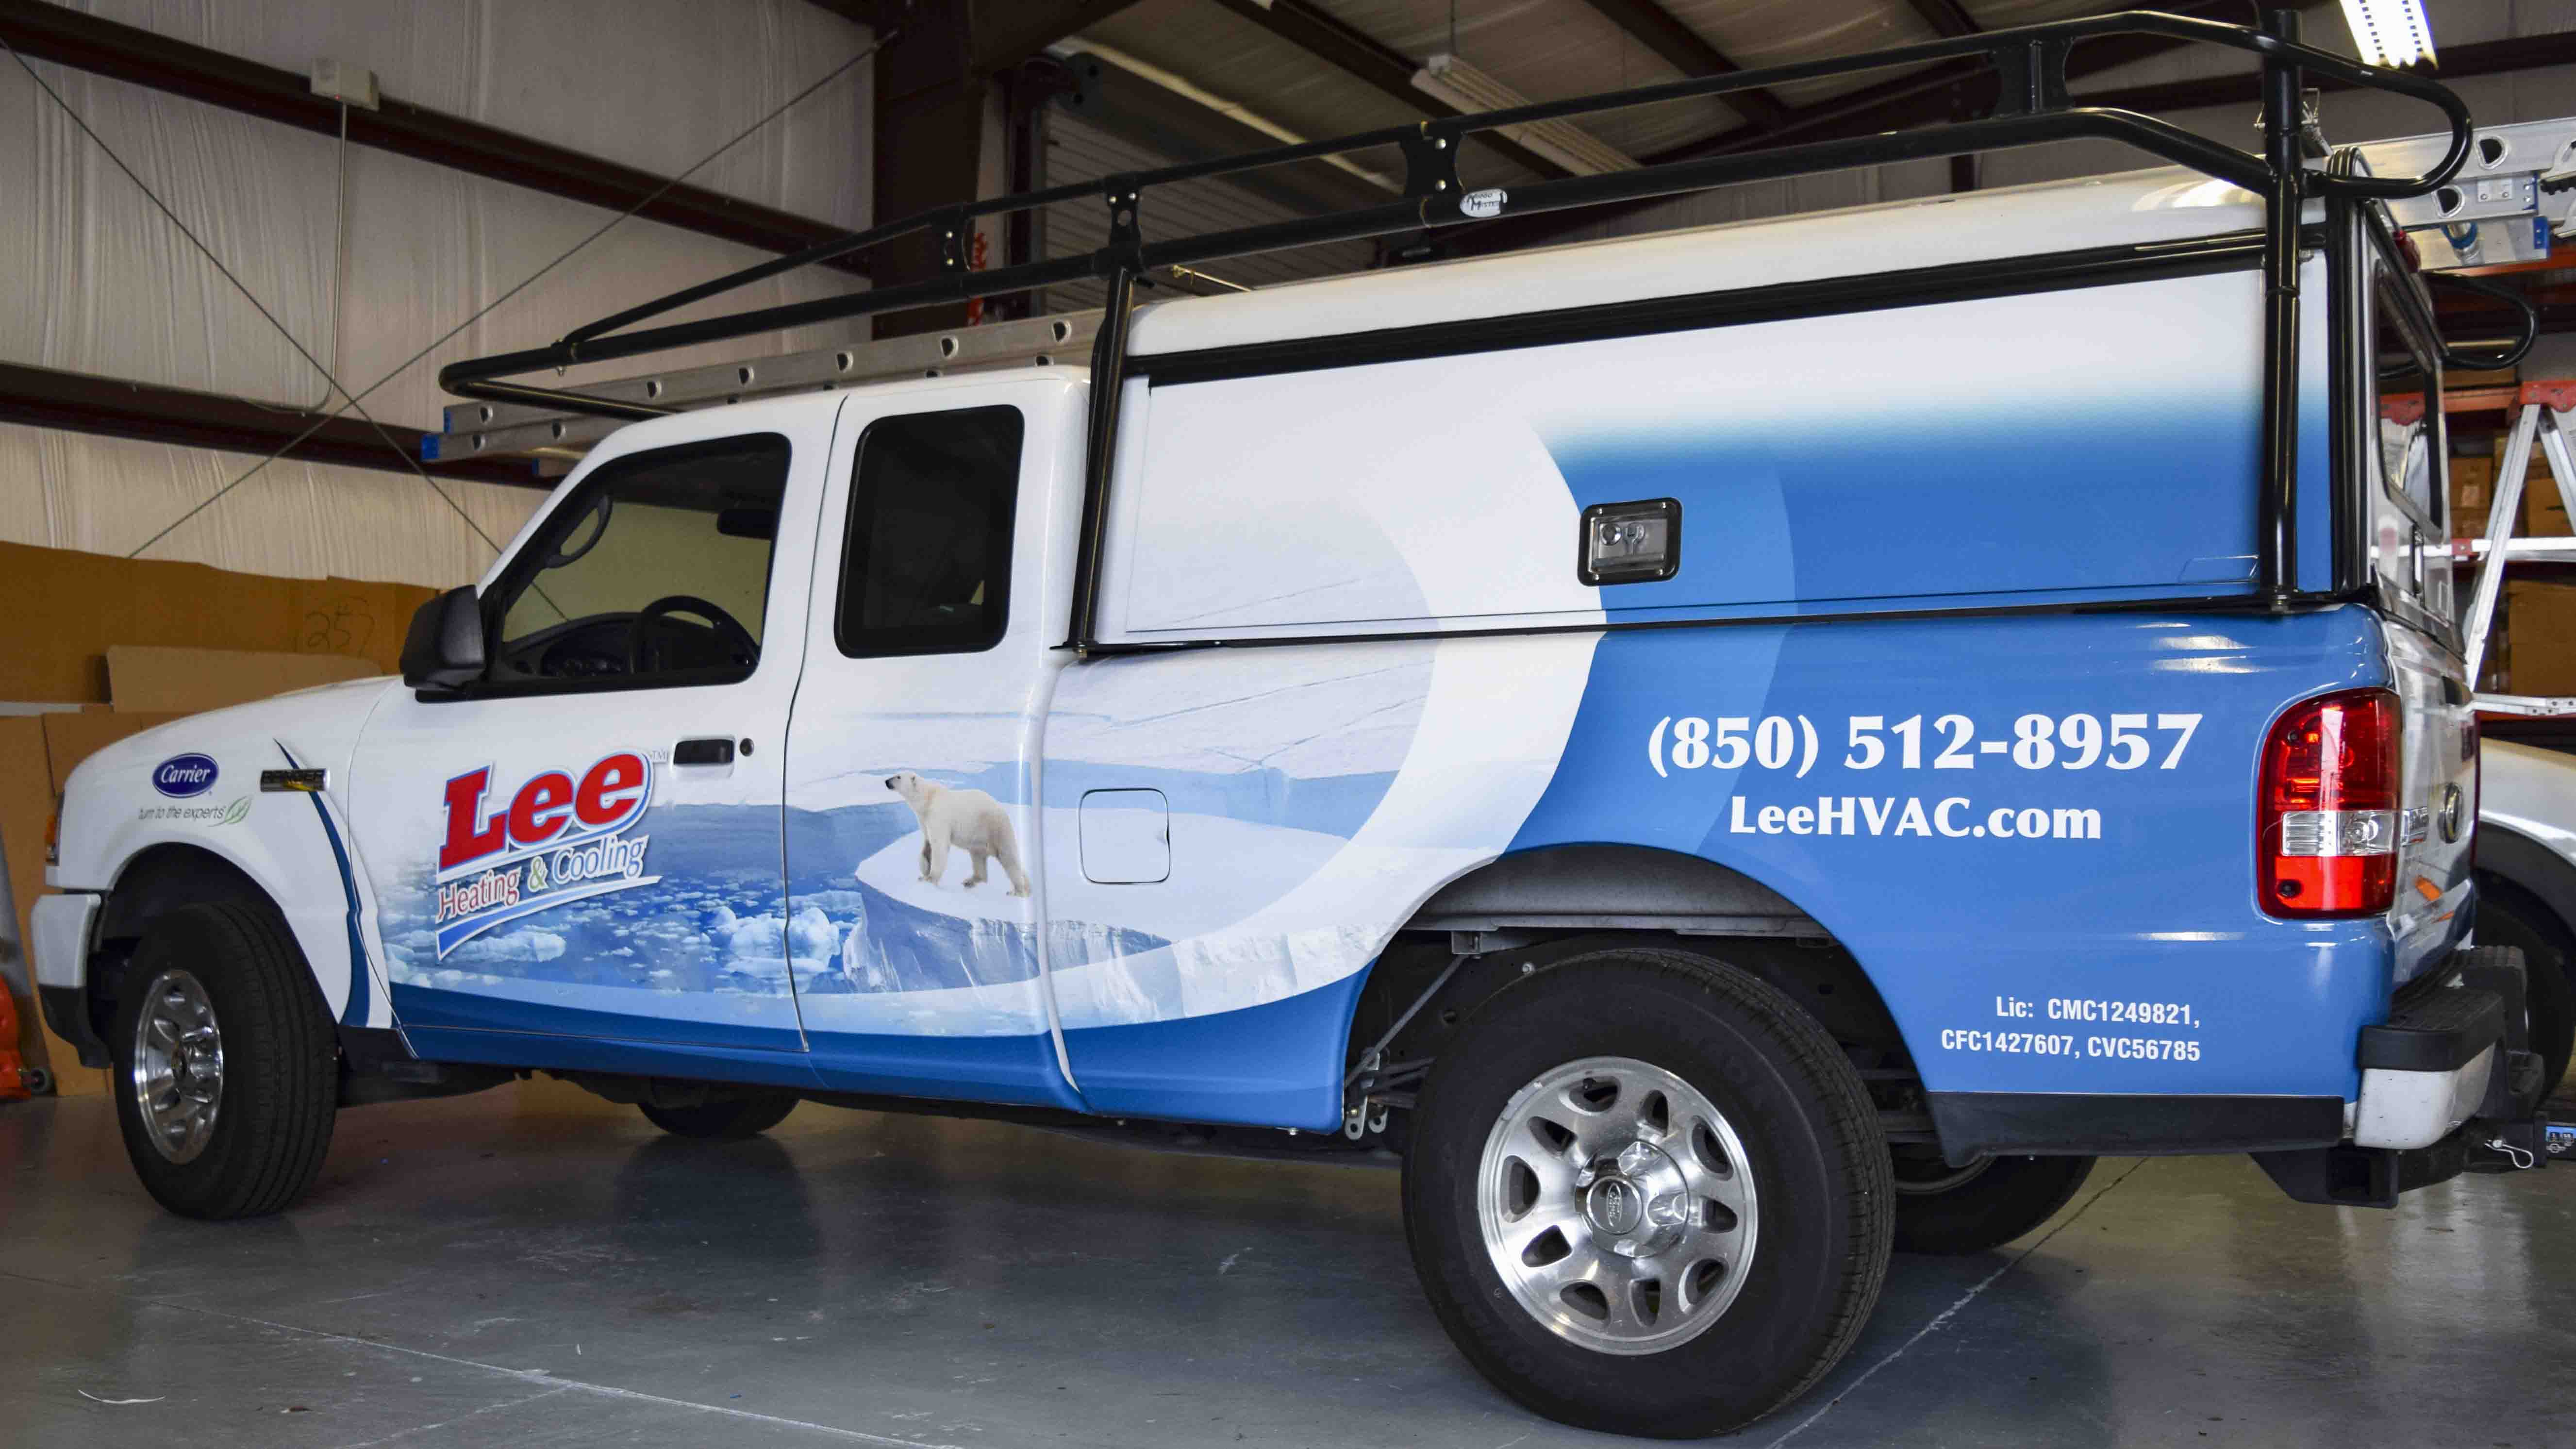 Pensacola Sign Fleet Wraps - Vehicle Wrap for Lee heating and Cooling